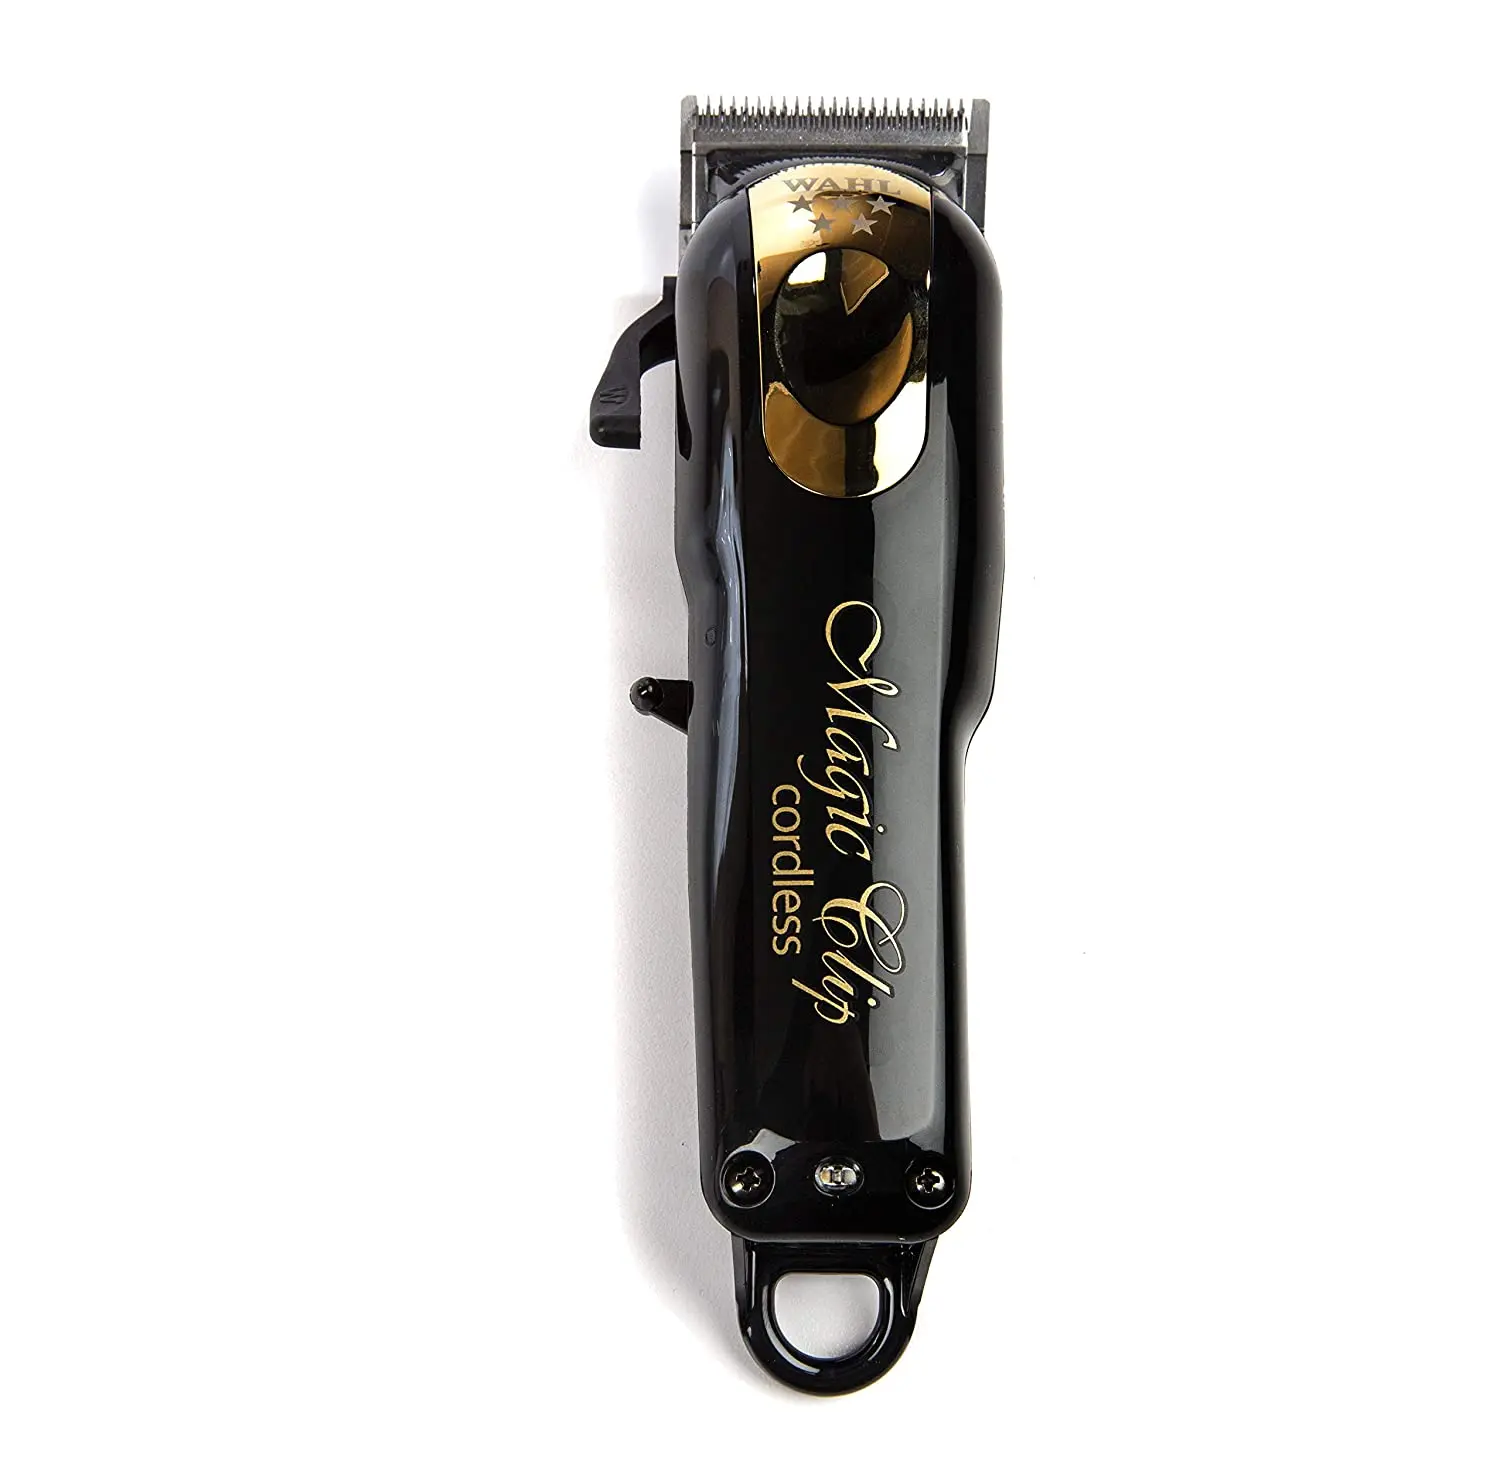 Wahl Professional 5-Star Limited Edition Black ＆ Gold Cordless Magic Clip #8148 Great for Professional Stylists and Barbers